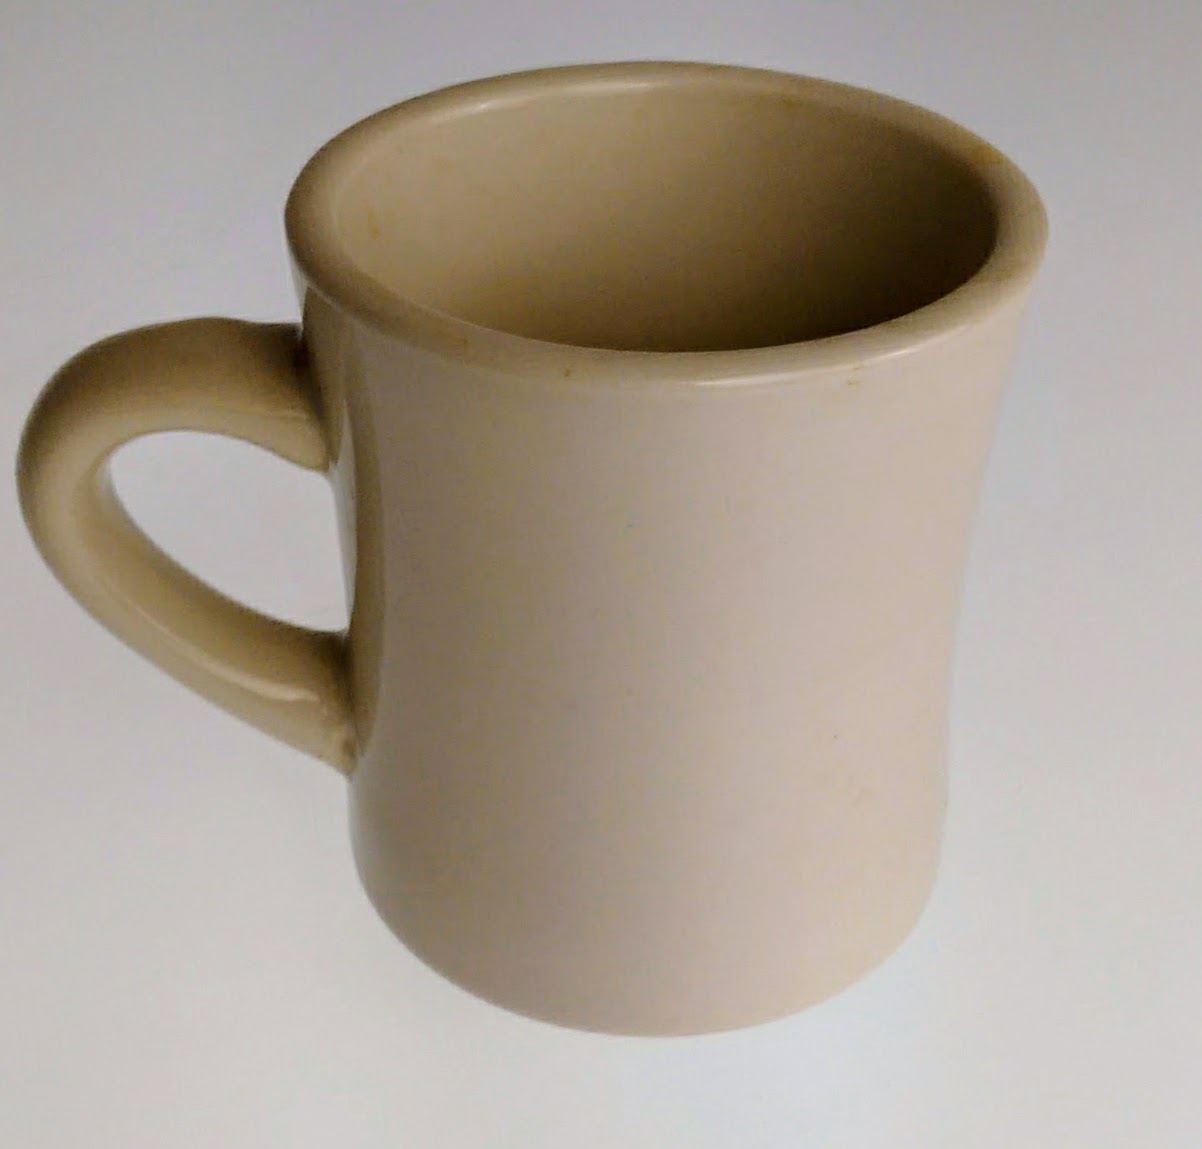 Coffee cup product photography.